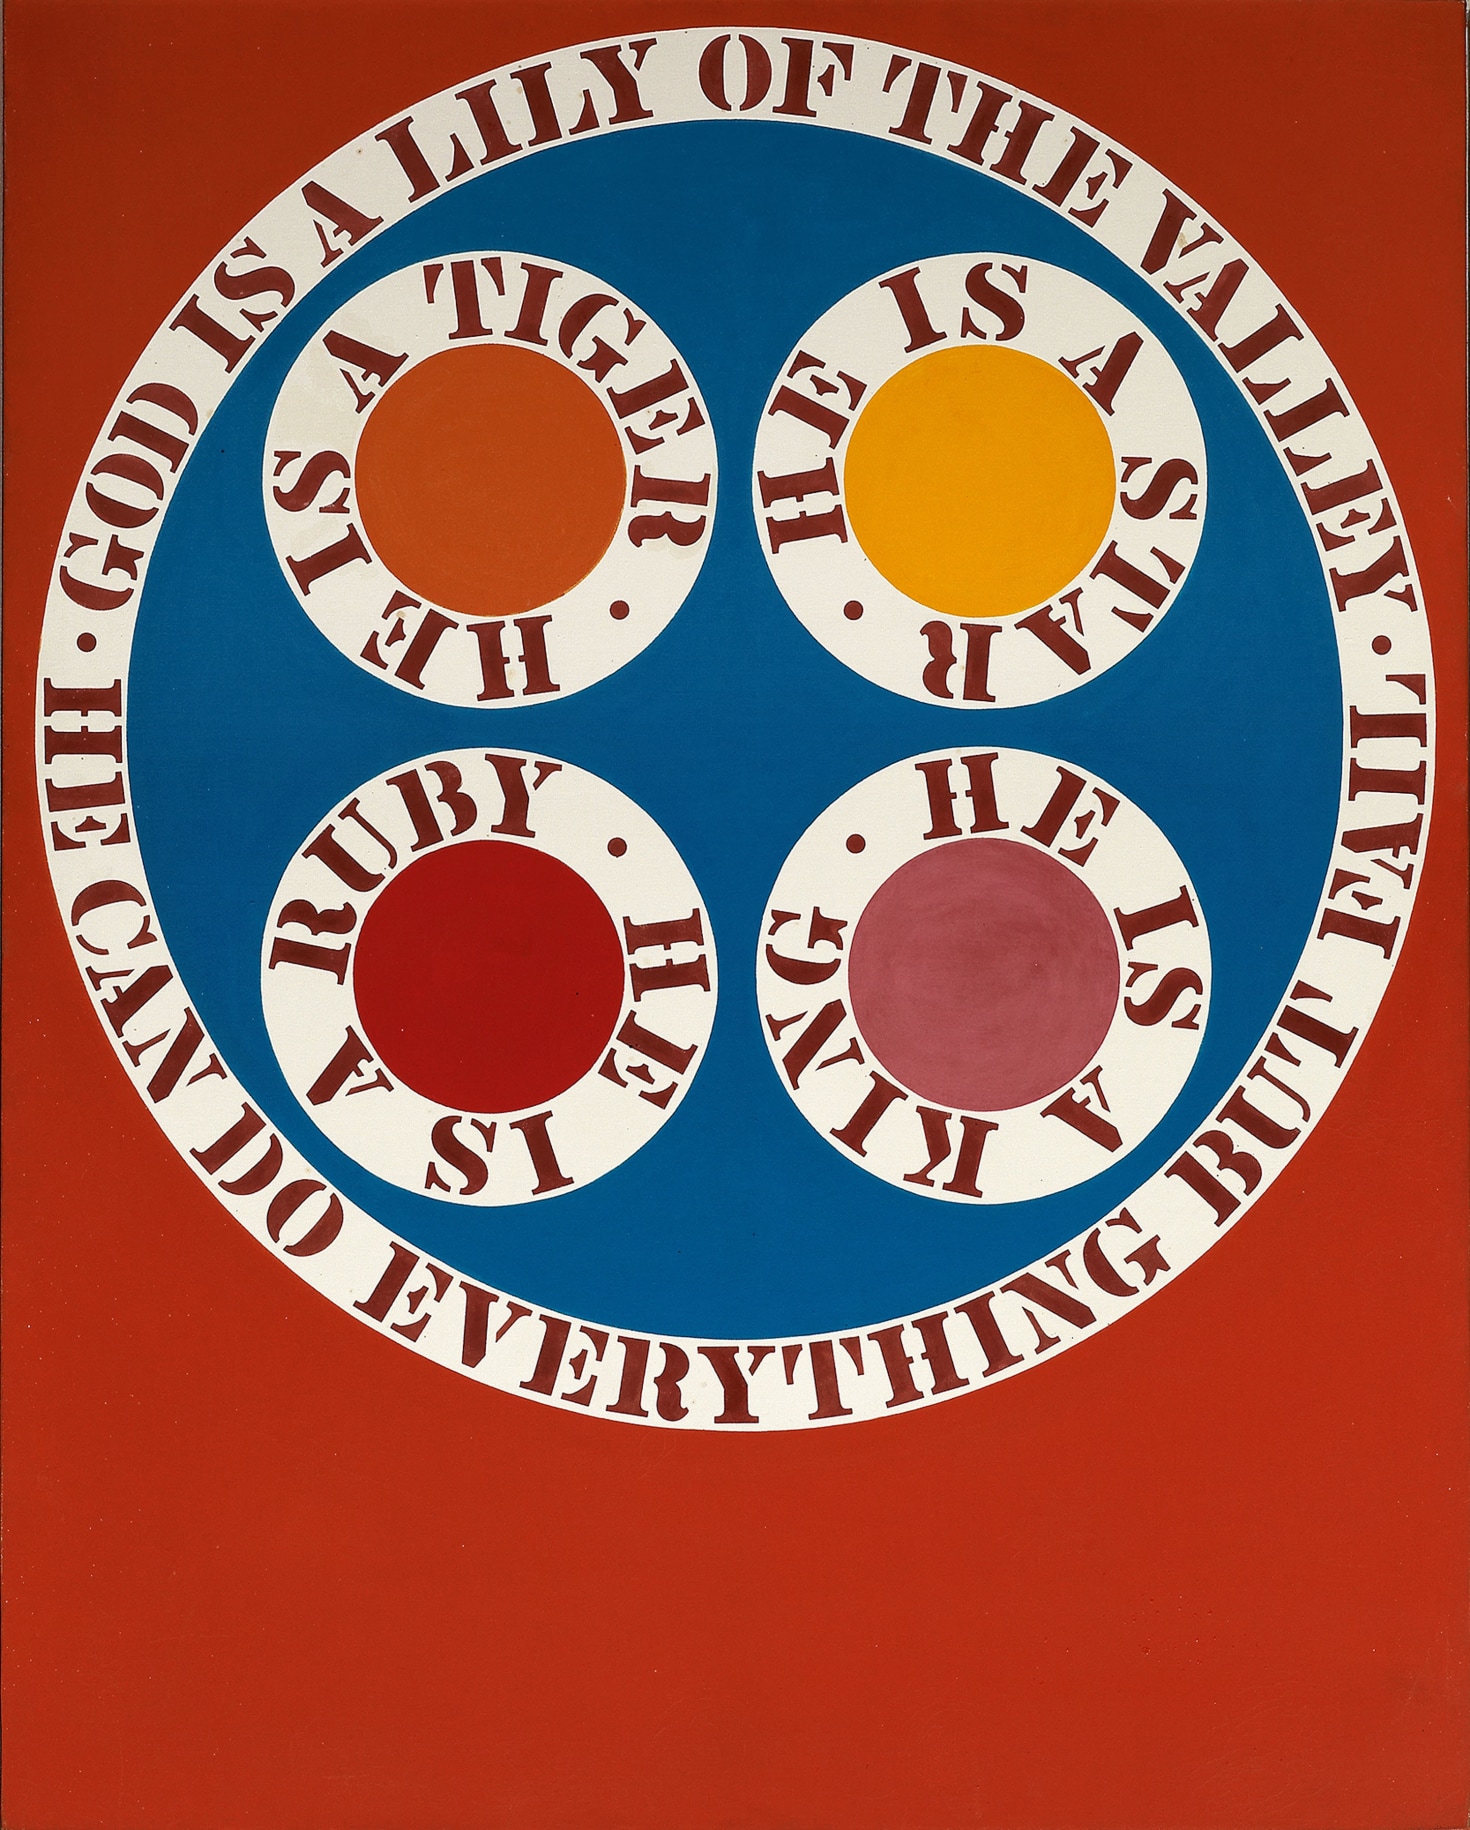 A 60 by 48 inch painting titled God Is a Lily of the Valley, with a large blue circle against a red background. Within the circle are four other circles enclosing text around a white outer ring. The text reads &quot;He is a star,&quot; &quot;He is a king,&quot; &quot;He is a ruby,&quot; and &quot;He is a tiger.&quot; A white ring around the larger circle contains red stenciled text that reads &quot;God is a lily of the valley. He can do everything but fail.&quot;